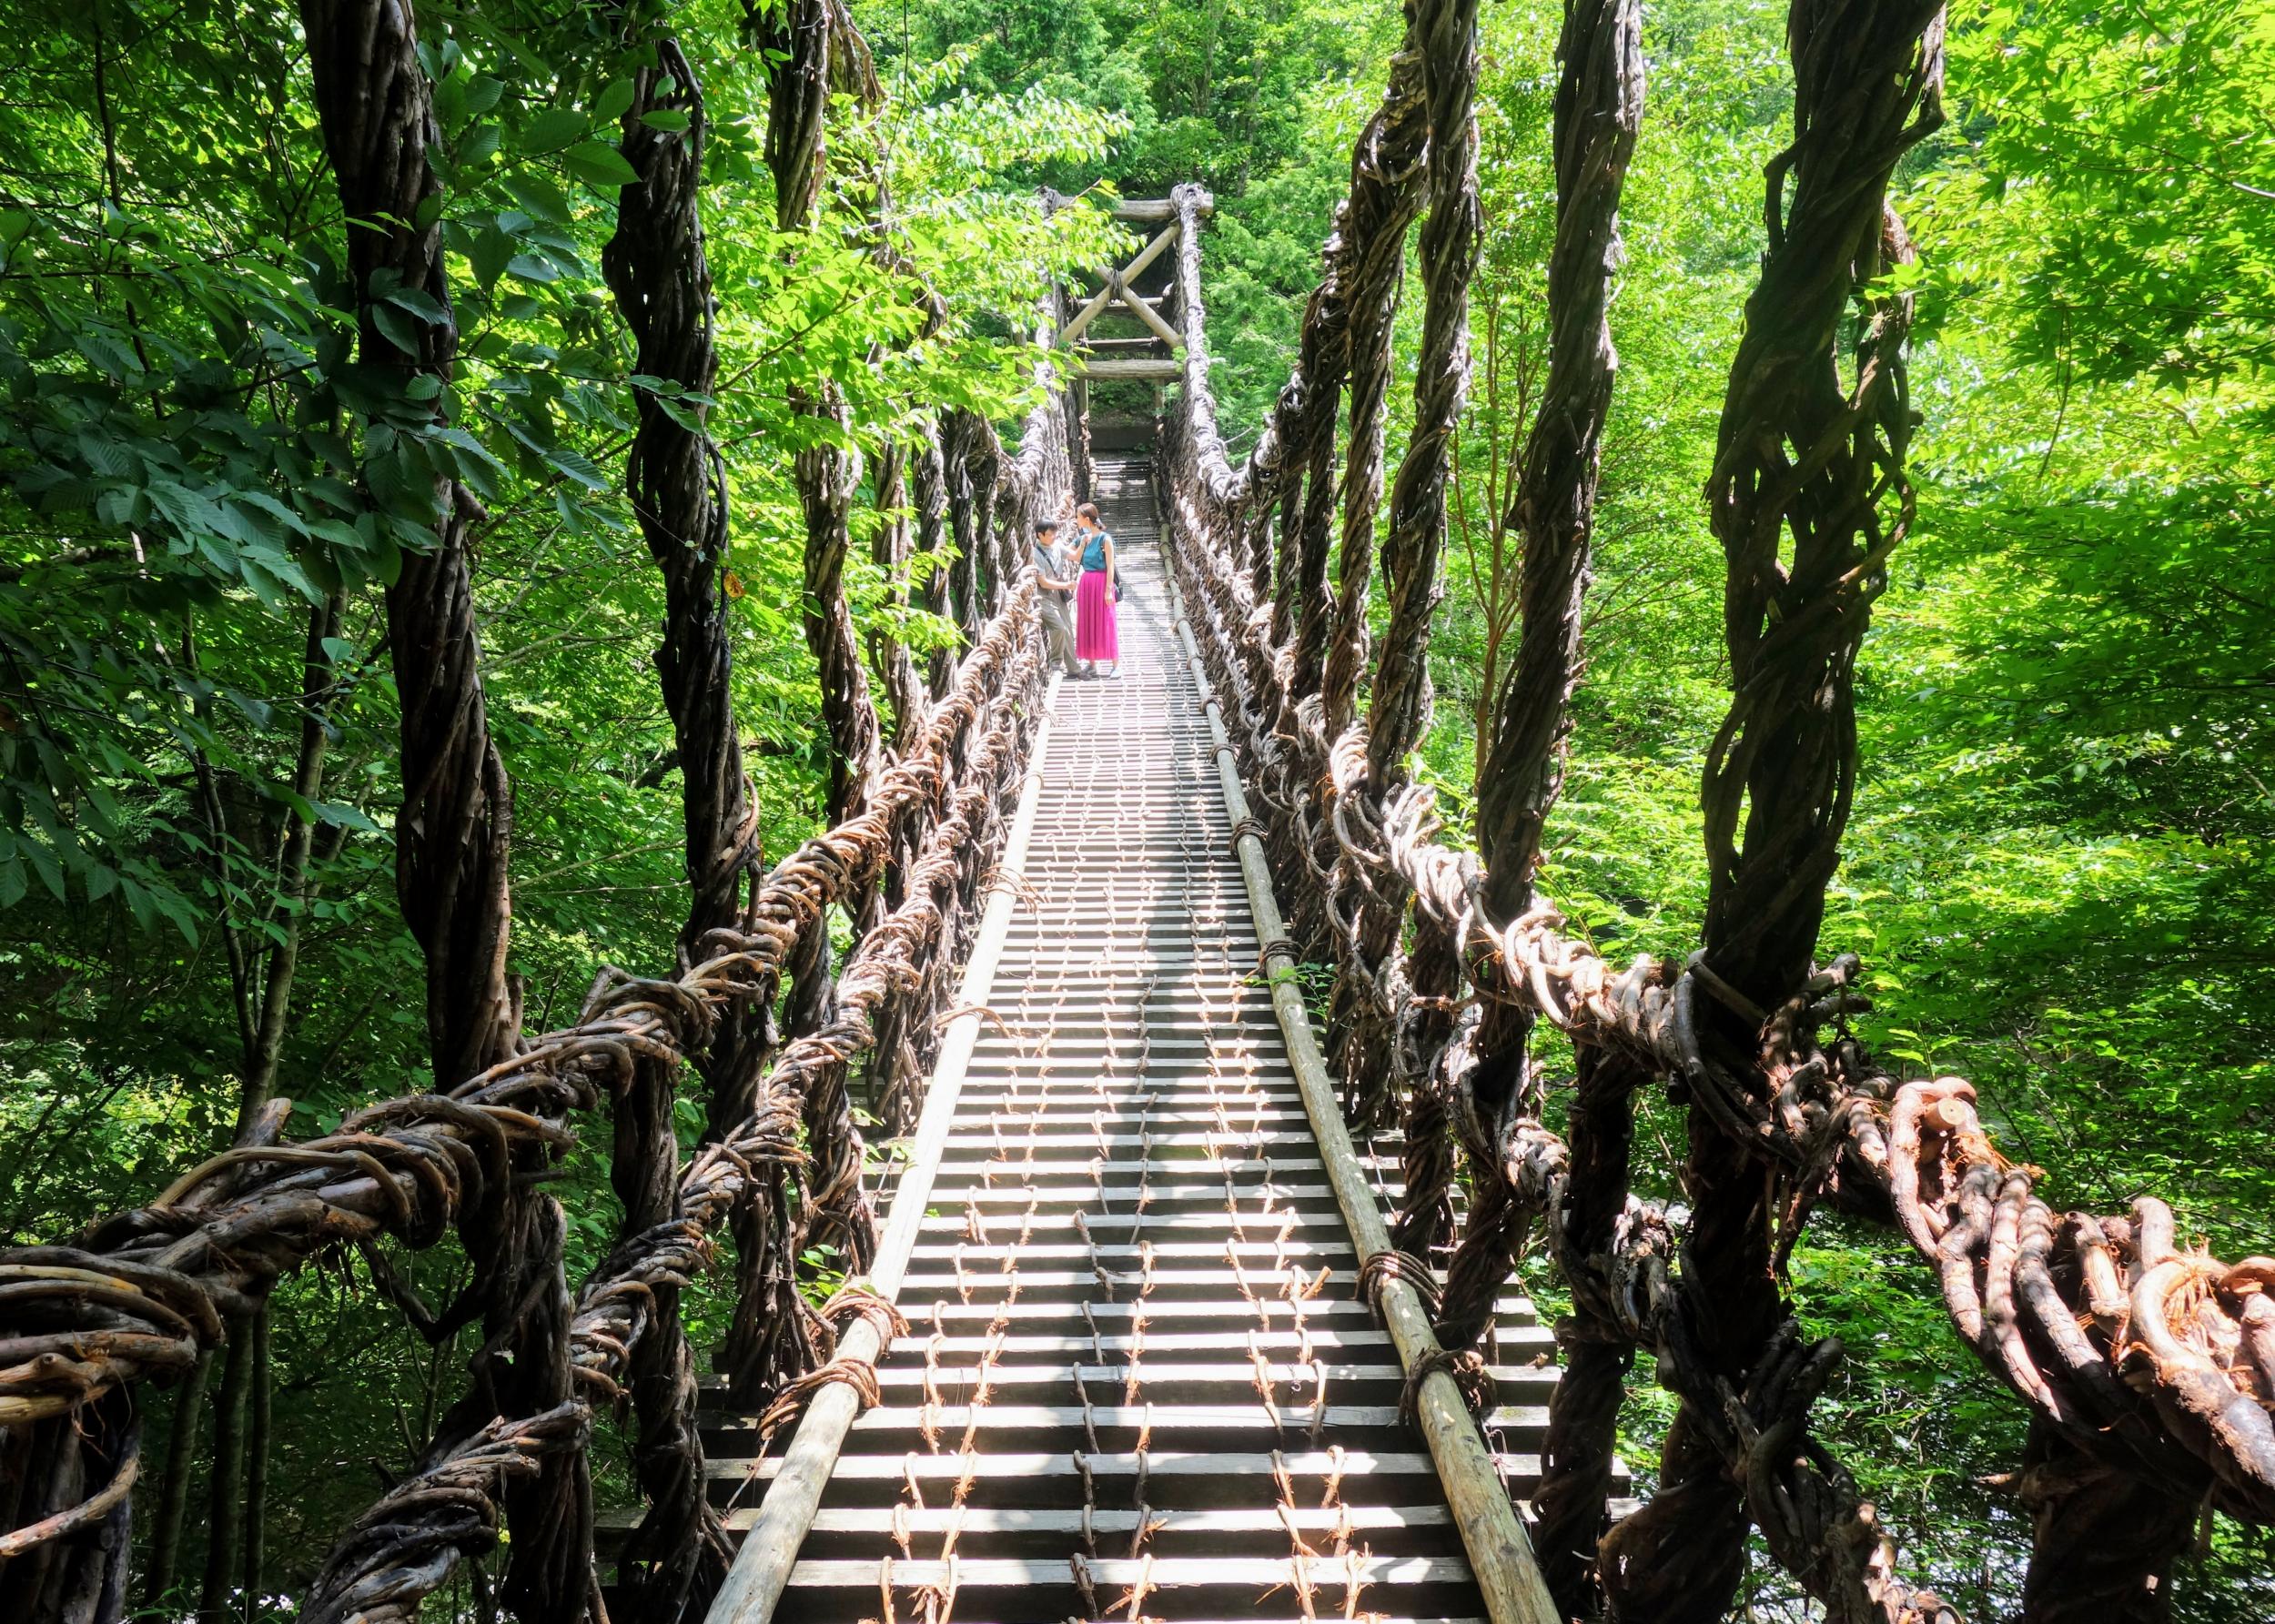 Iya Valley is known for its vine bridges